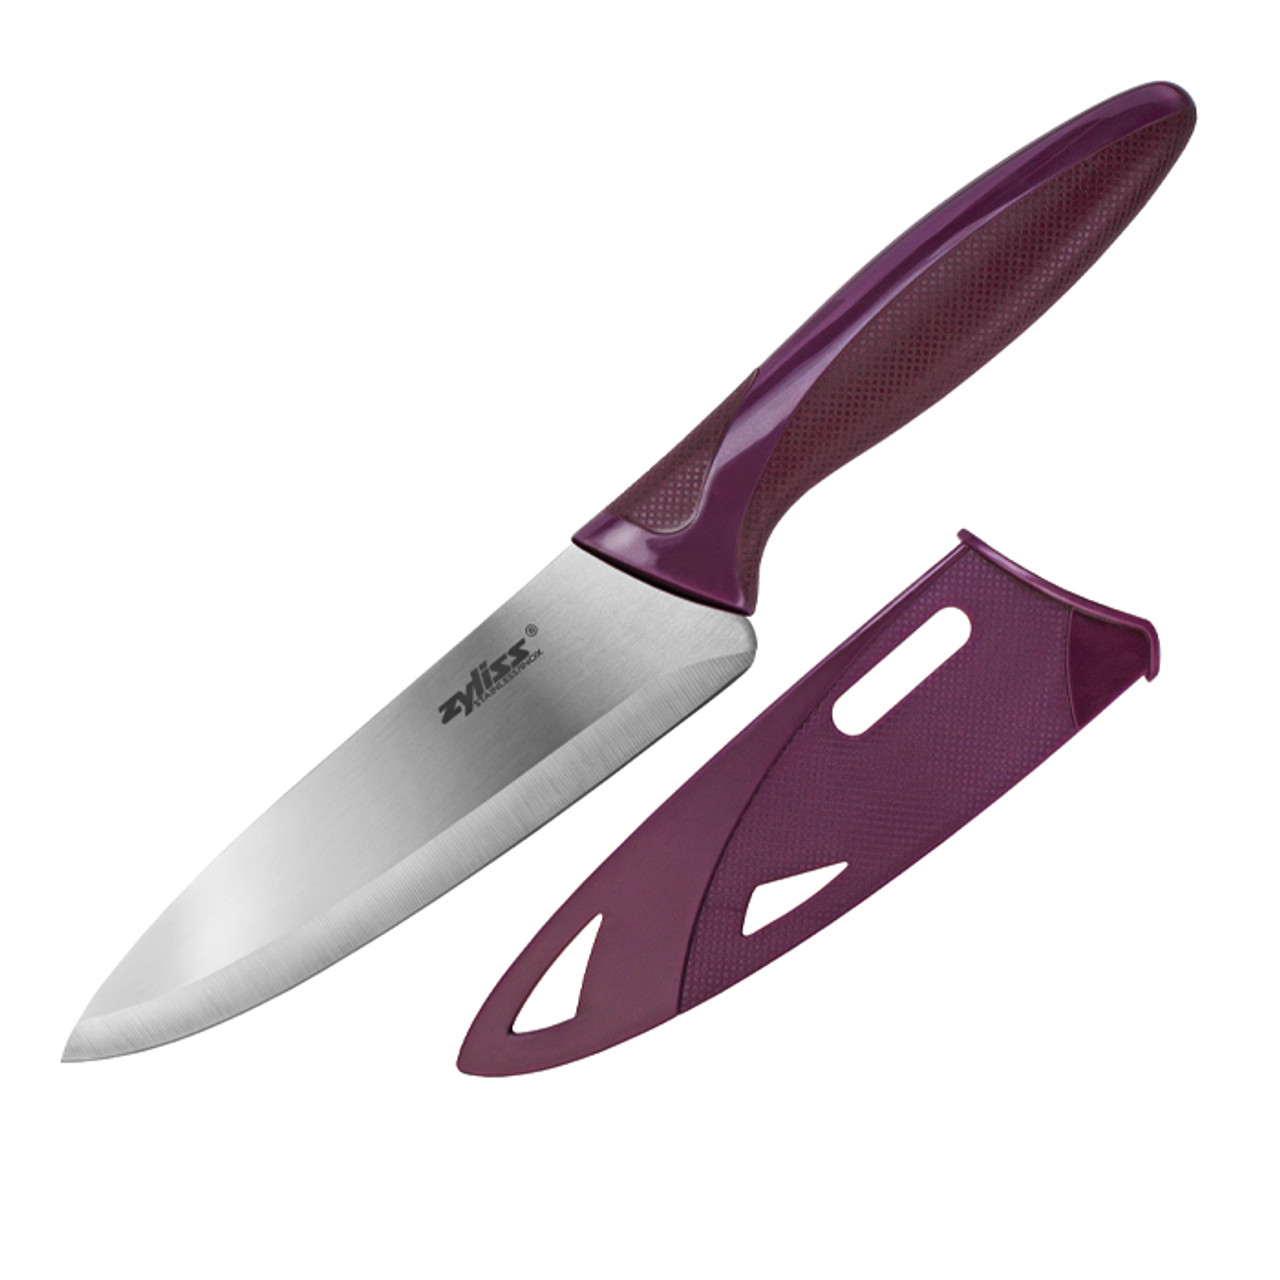 3 Piece Knife Set with Covers